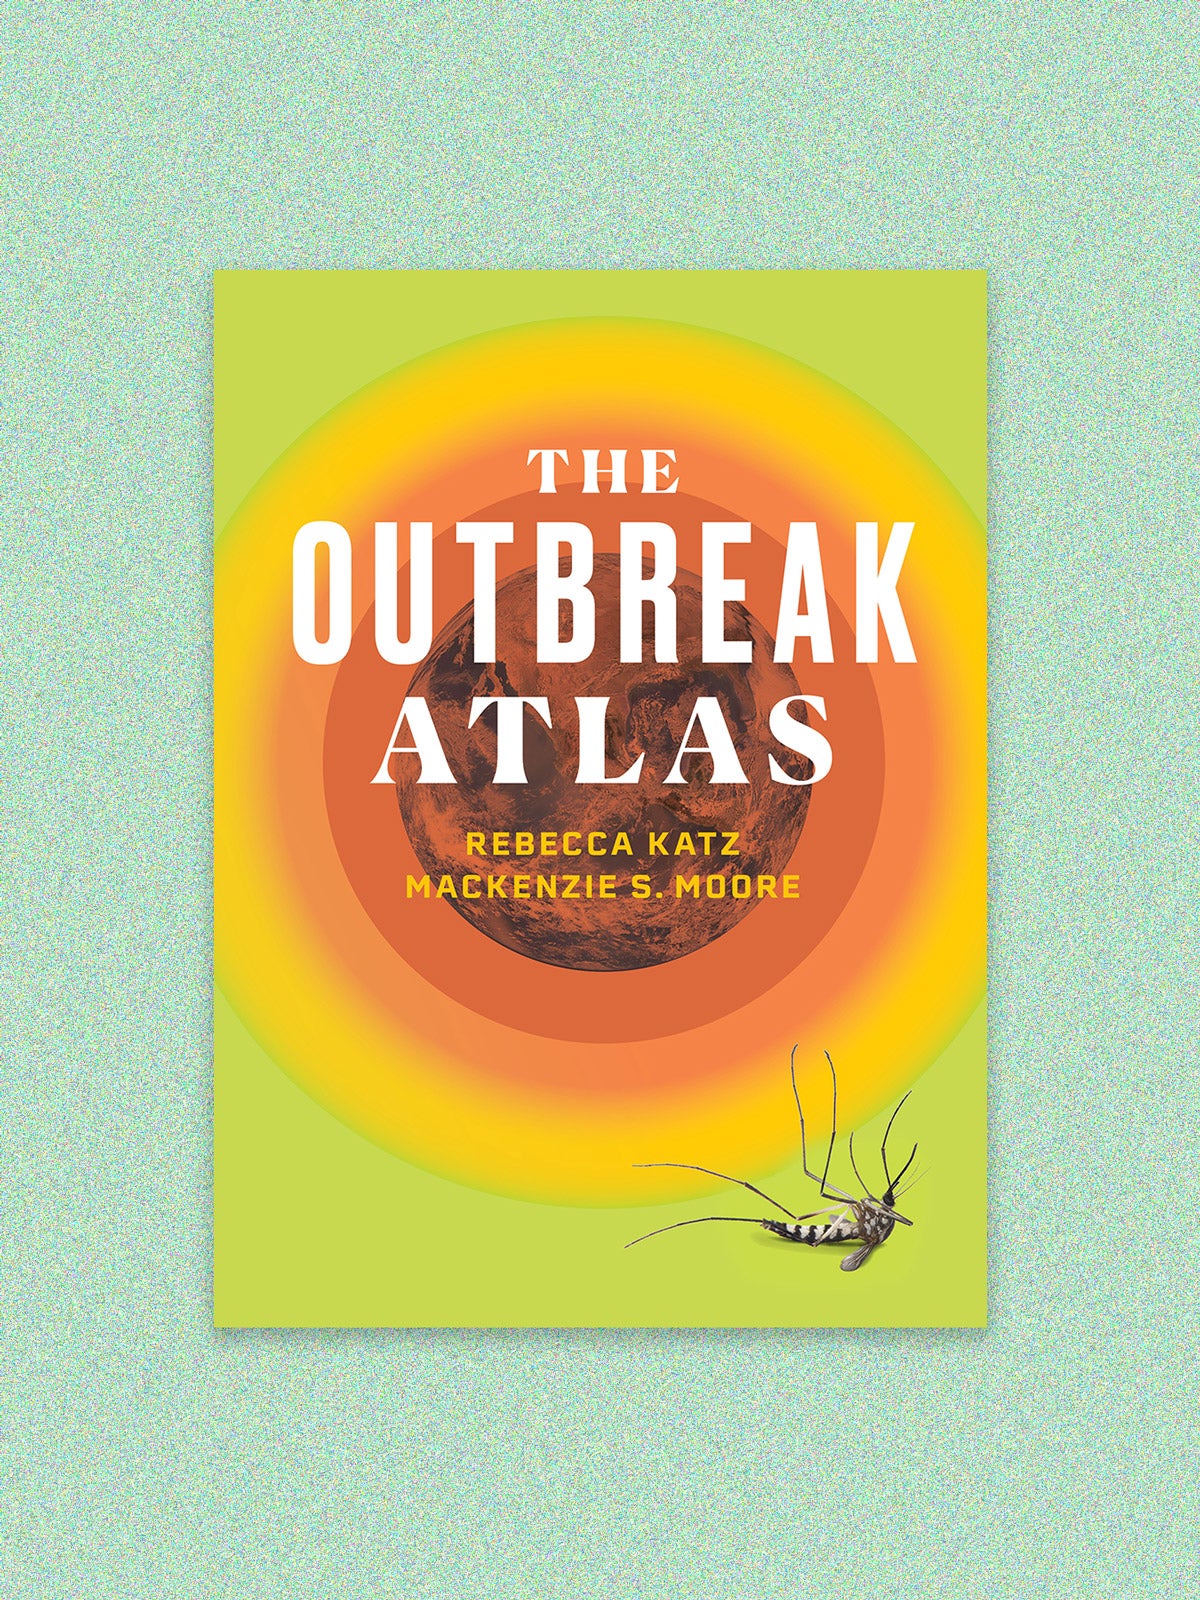 Book cover for “The Outbreak Atlas” by Rebecca Katz and Mackenzie S. Moore on a teal speckled background. The cover has a heat map with a dead mosquito in the corner.